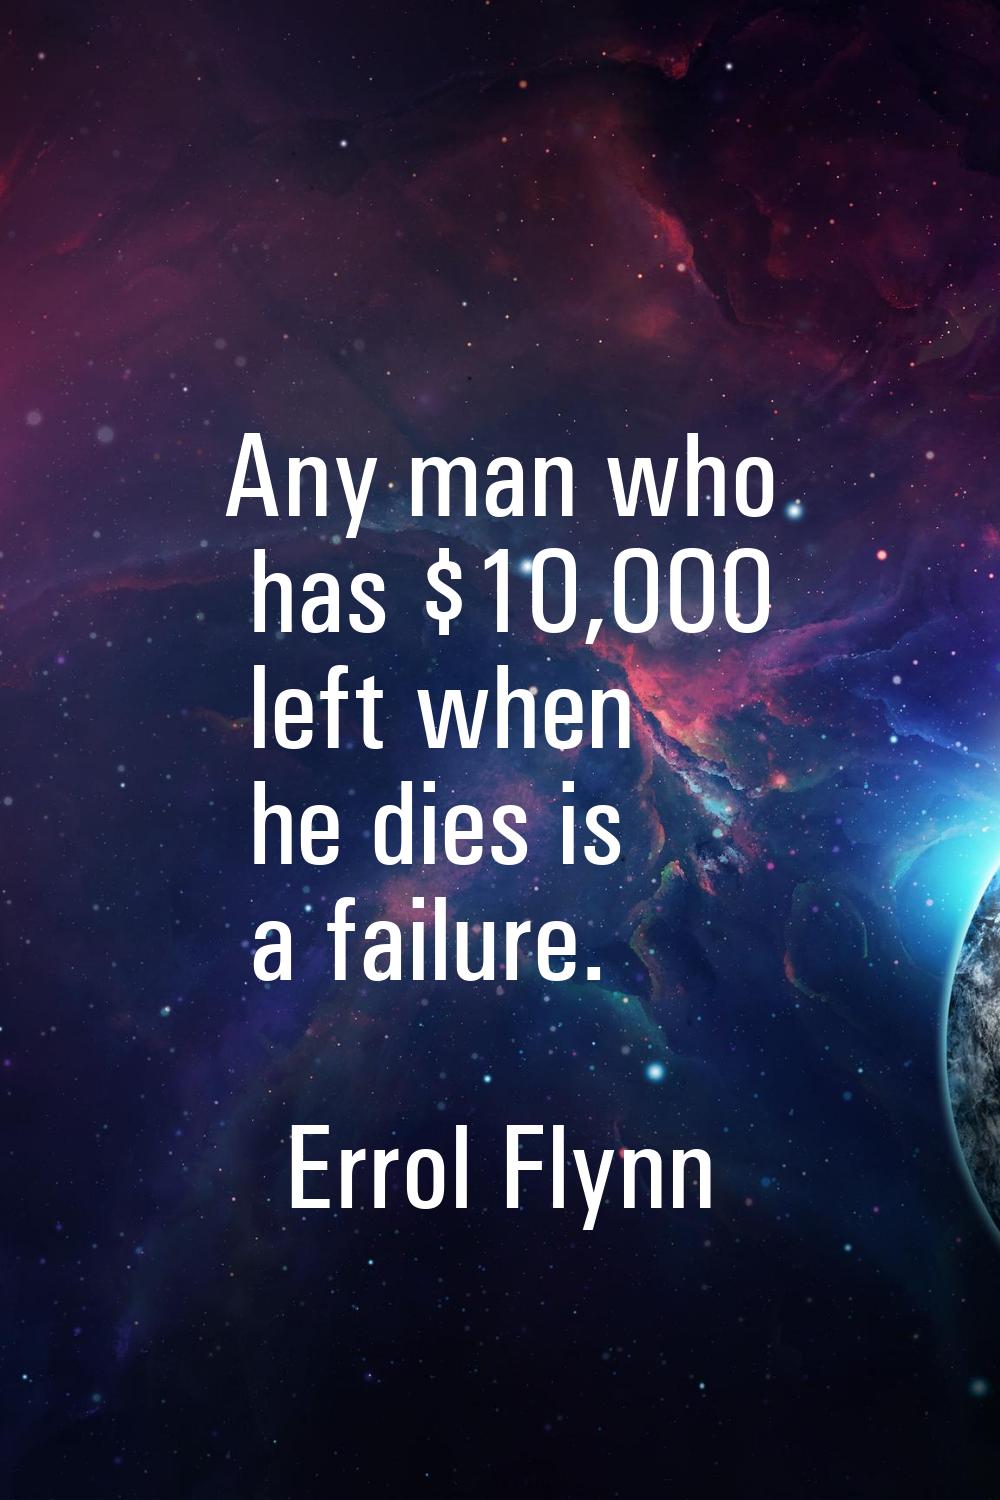 Any man who has $10,000 left when he dies is a failure.